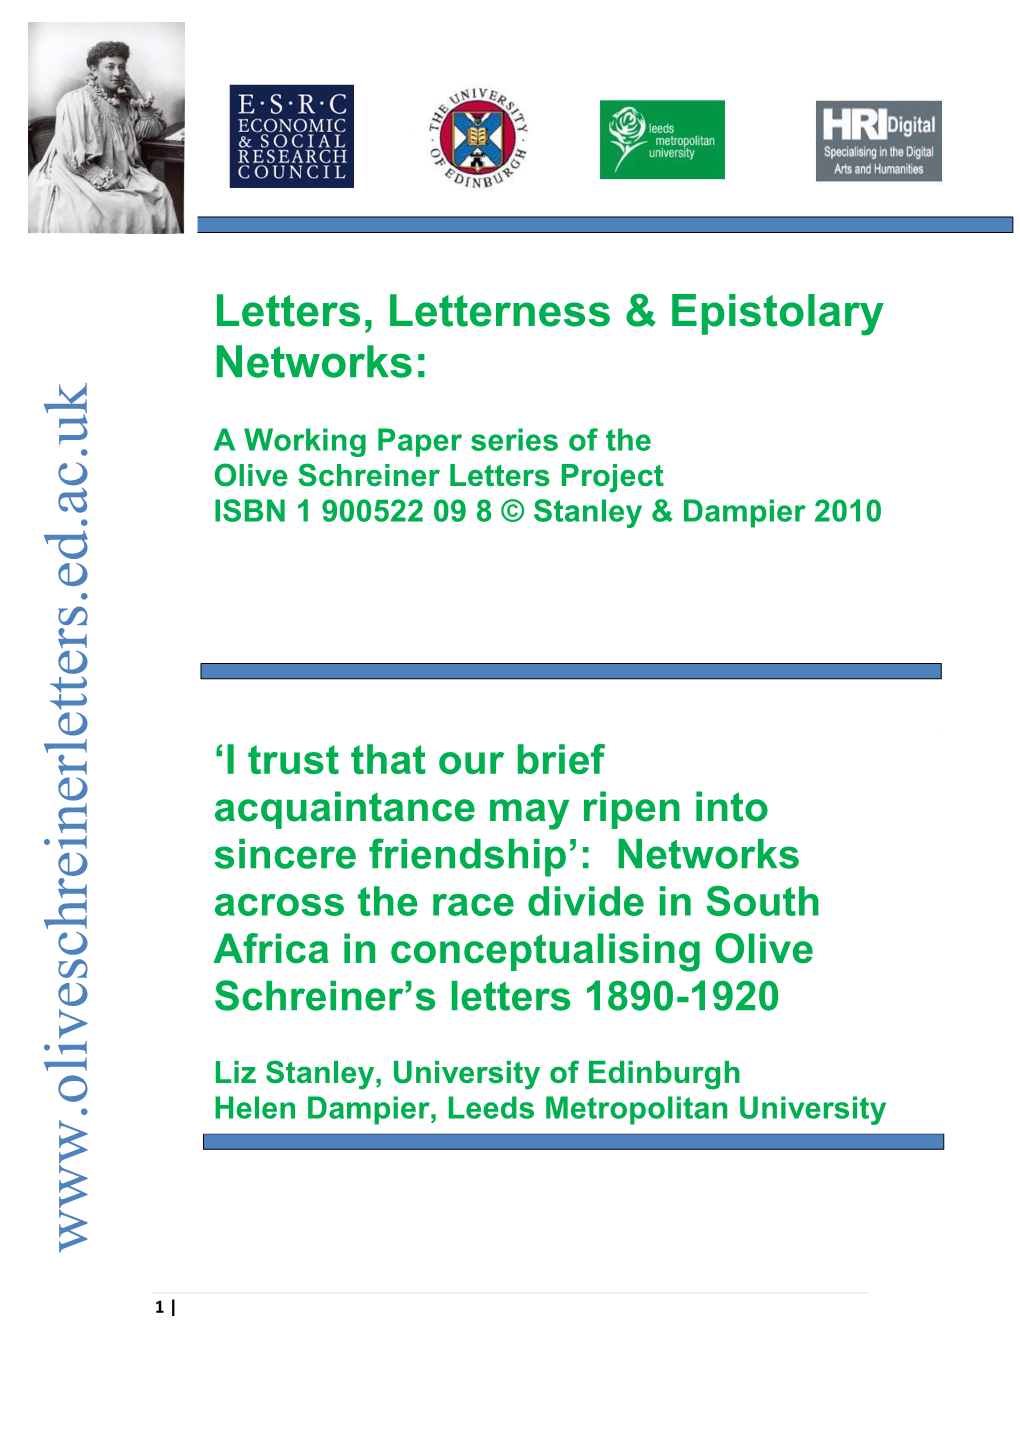 Networks Across the Race Divide in South Africa in Conceptualising Olive Schreiner’S Letters 1890-1920